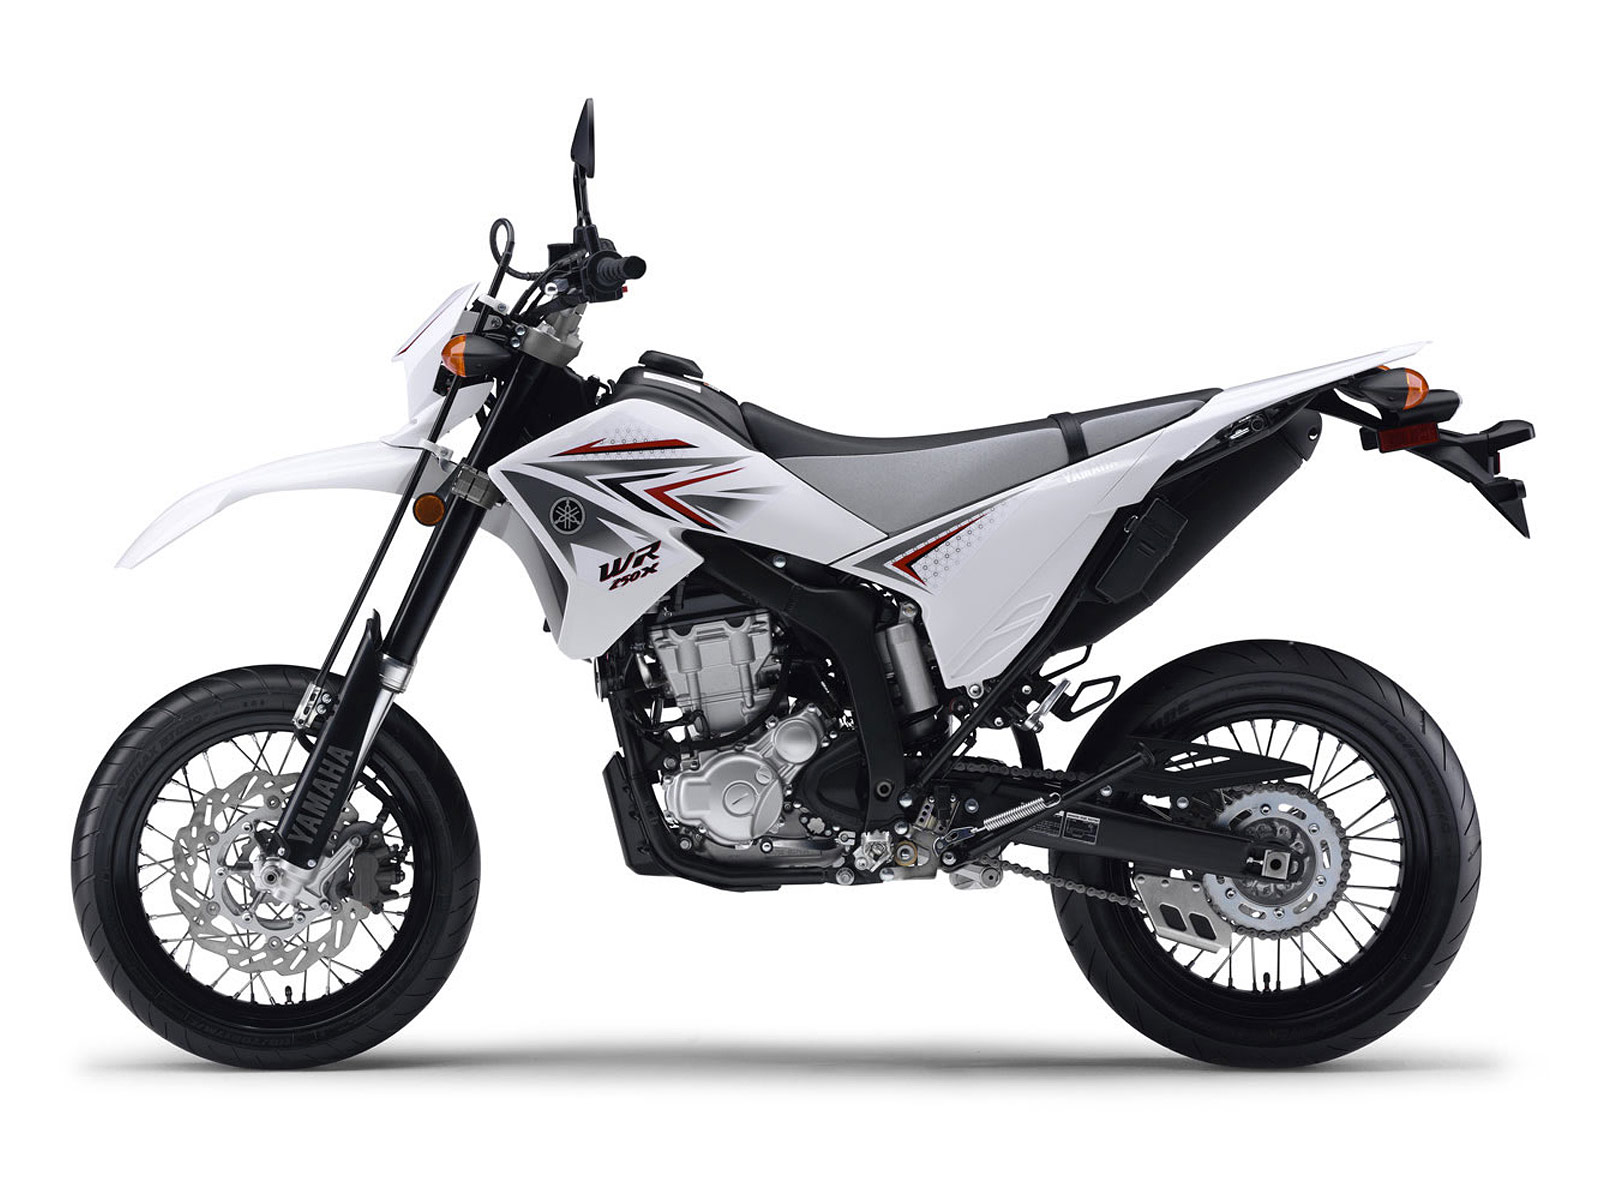  YAMAHA  WR250X 2010 wallpapers insurance informations 